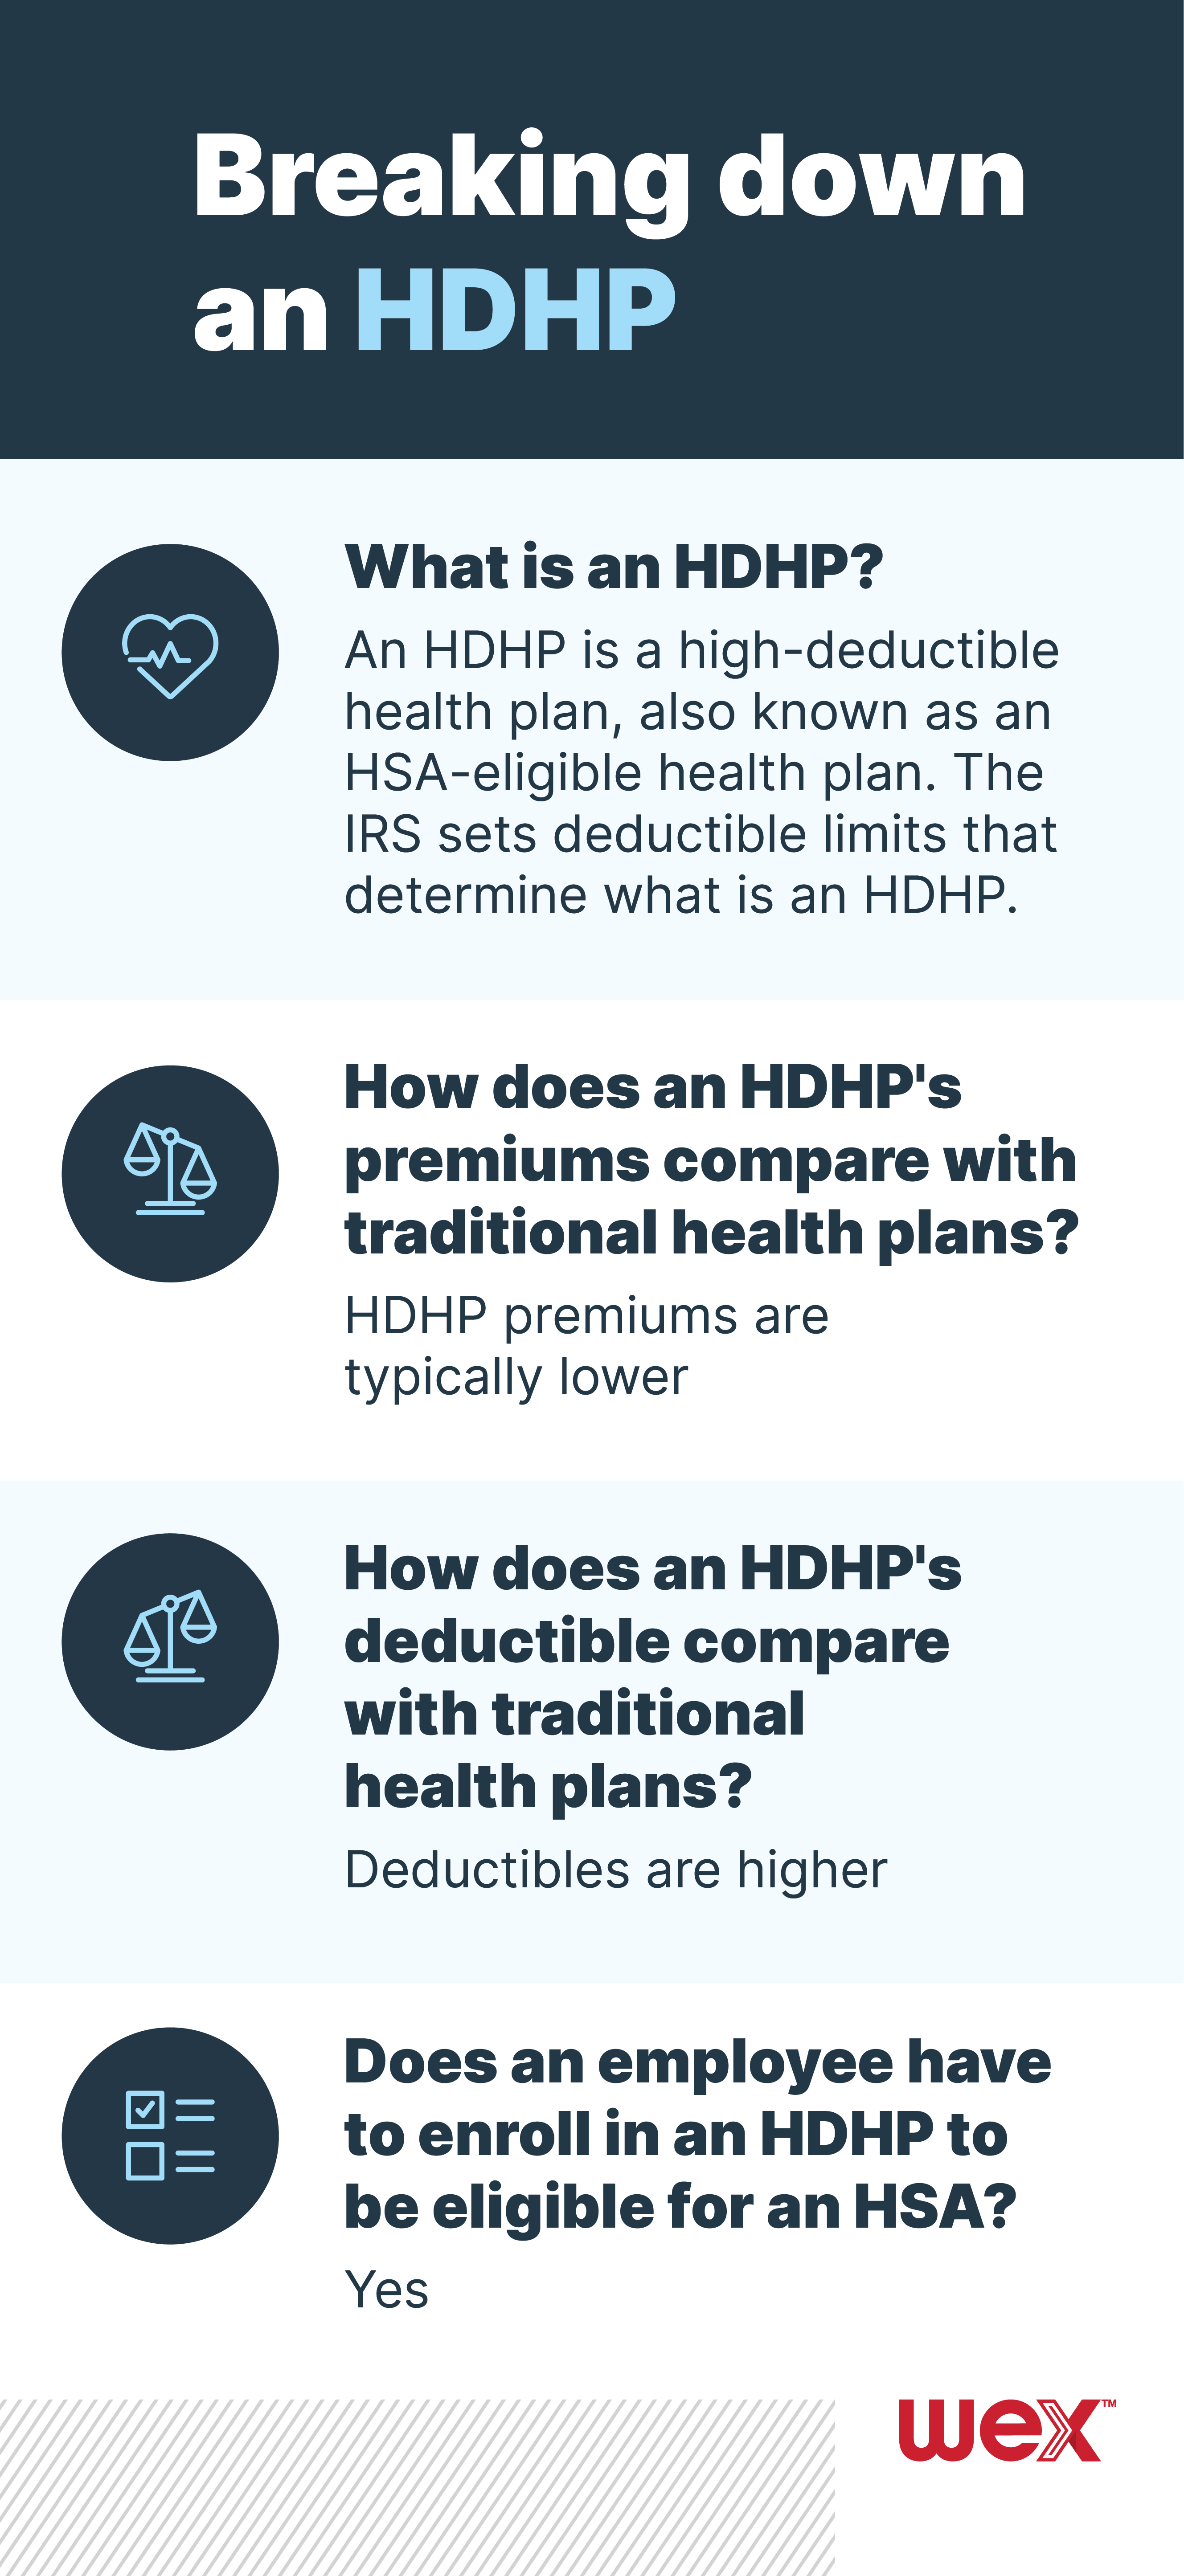 What is an HDHP or high-deductible health plan